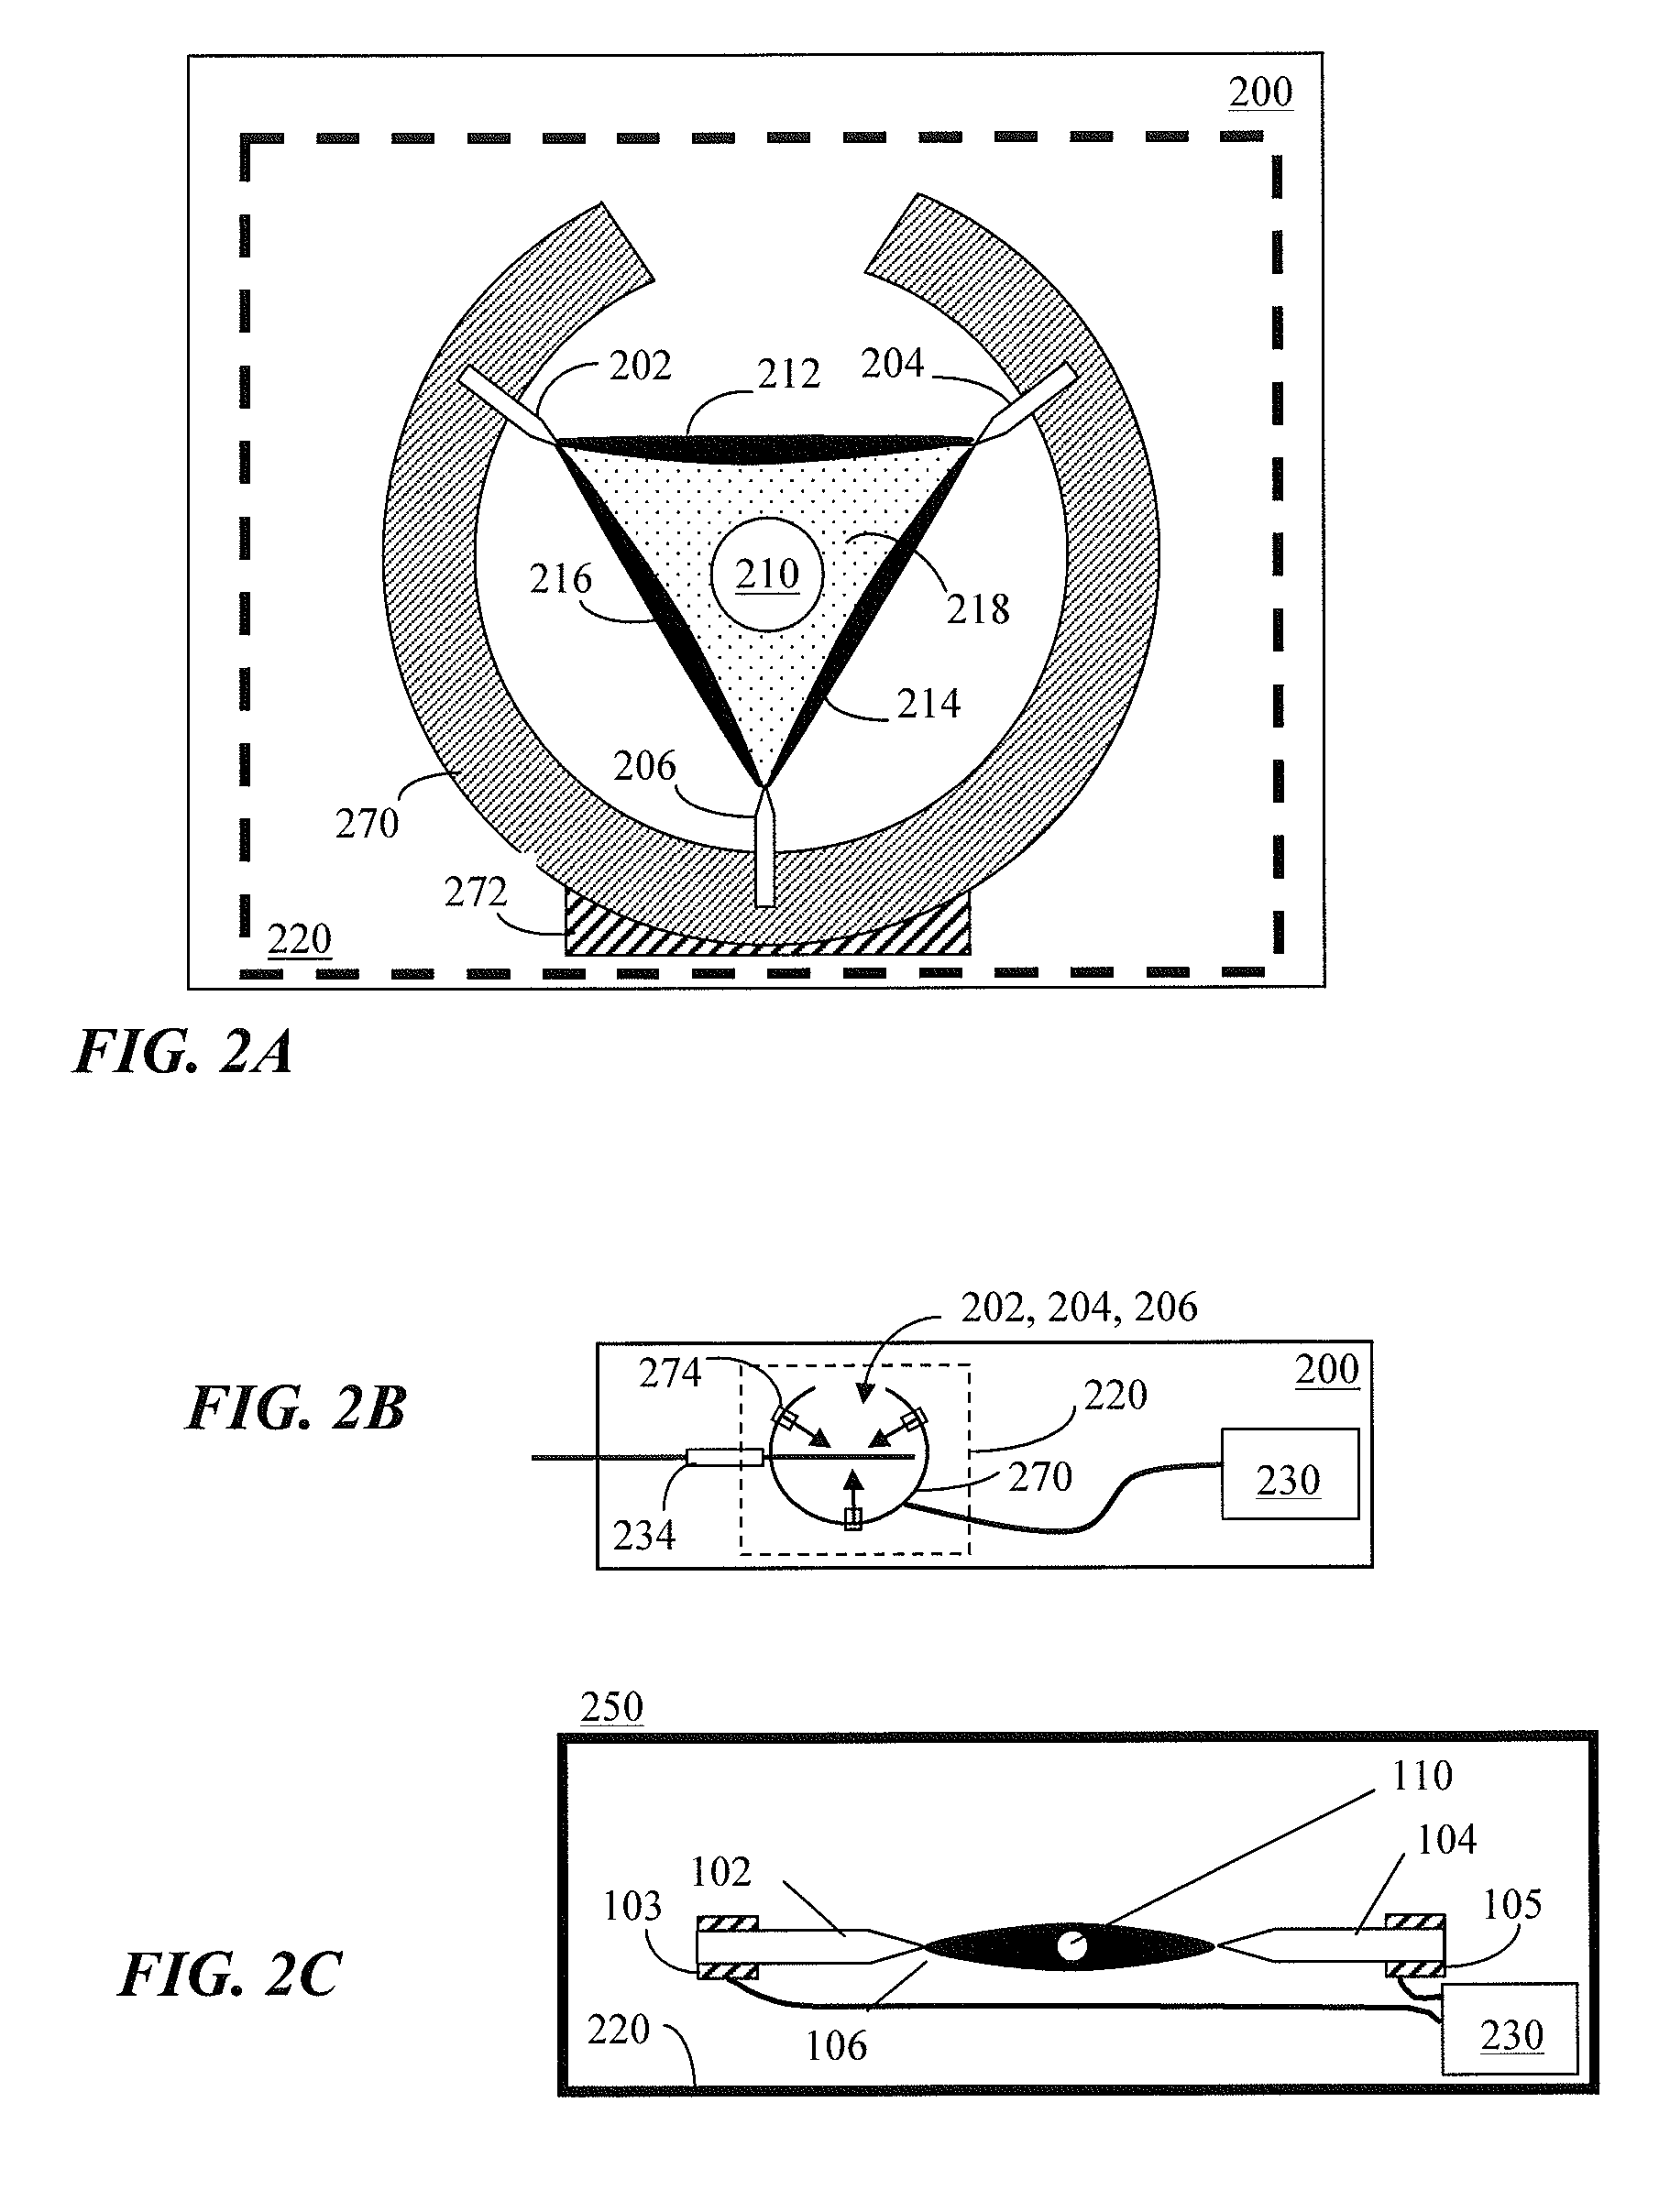 Multi-electrode system with vibrating electrodes